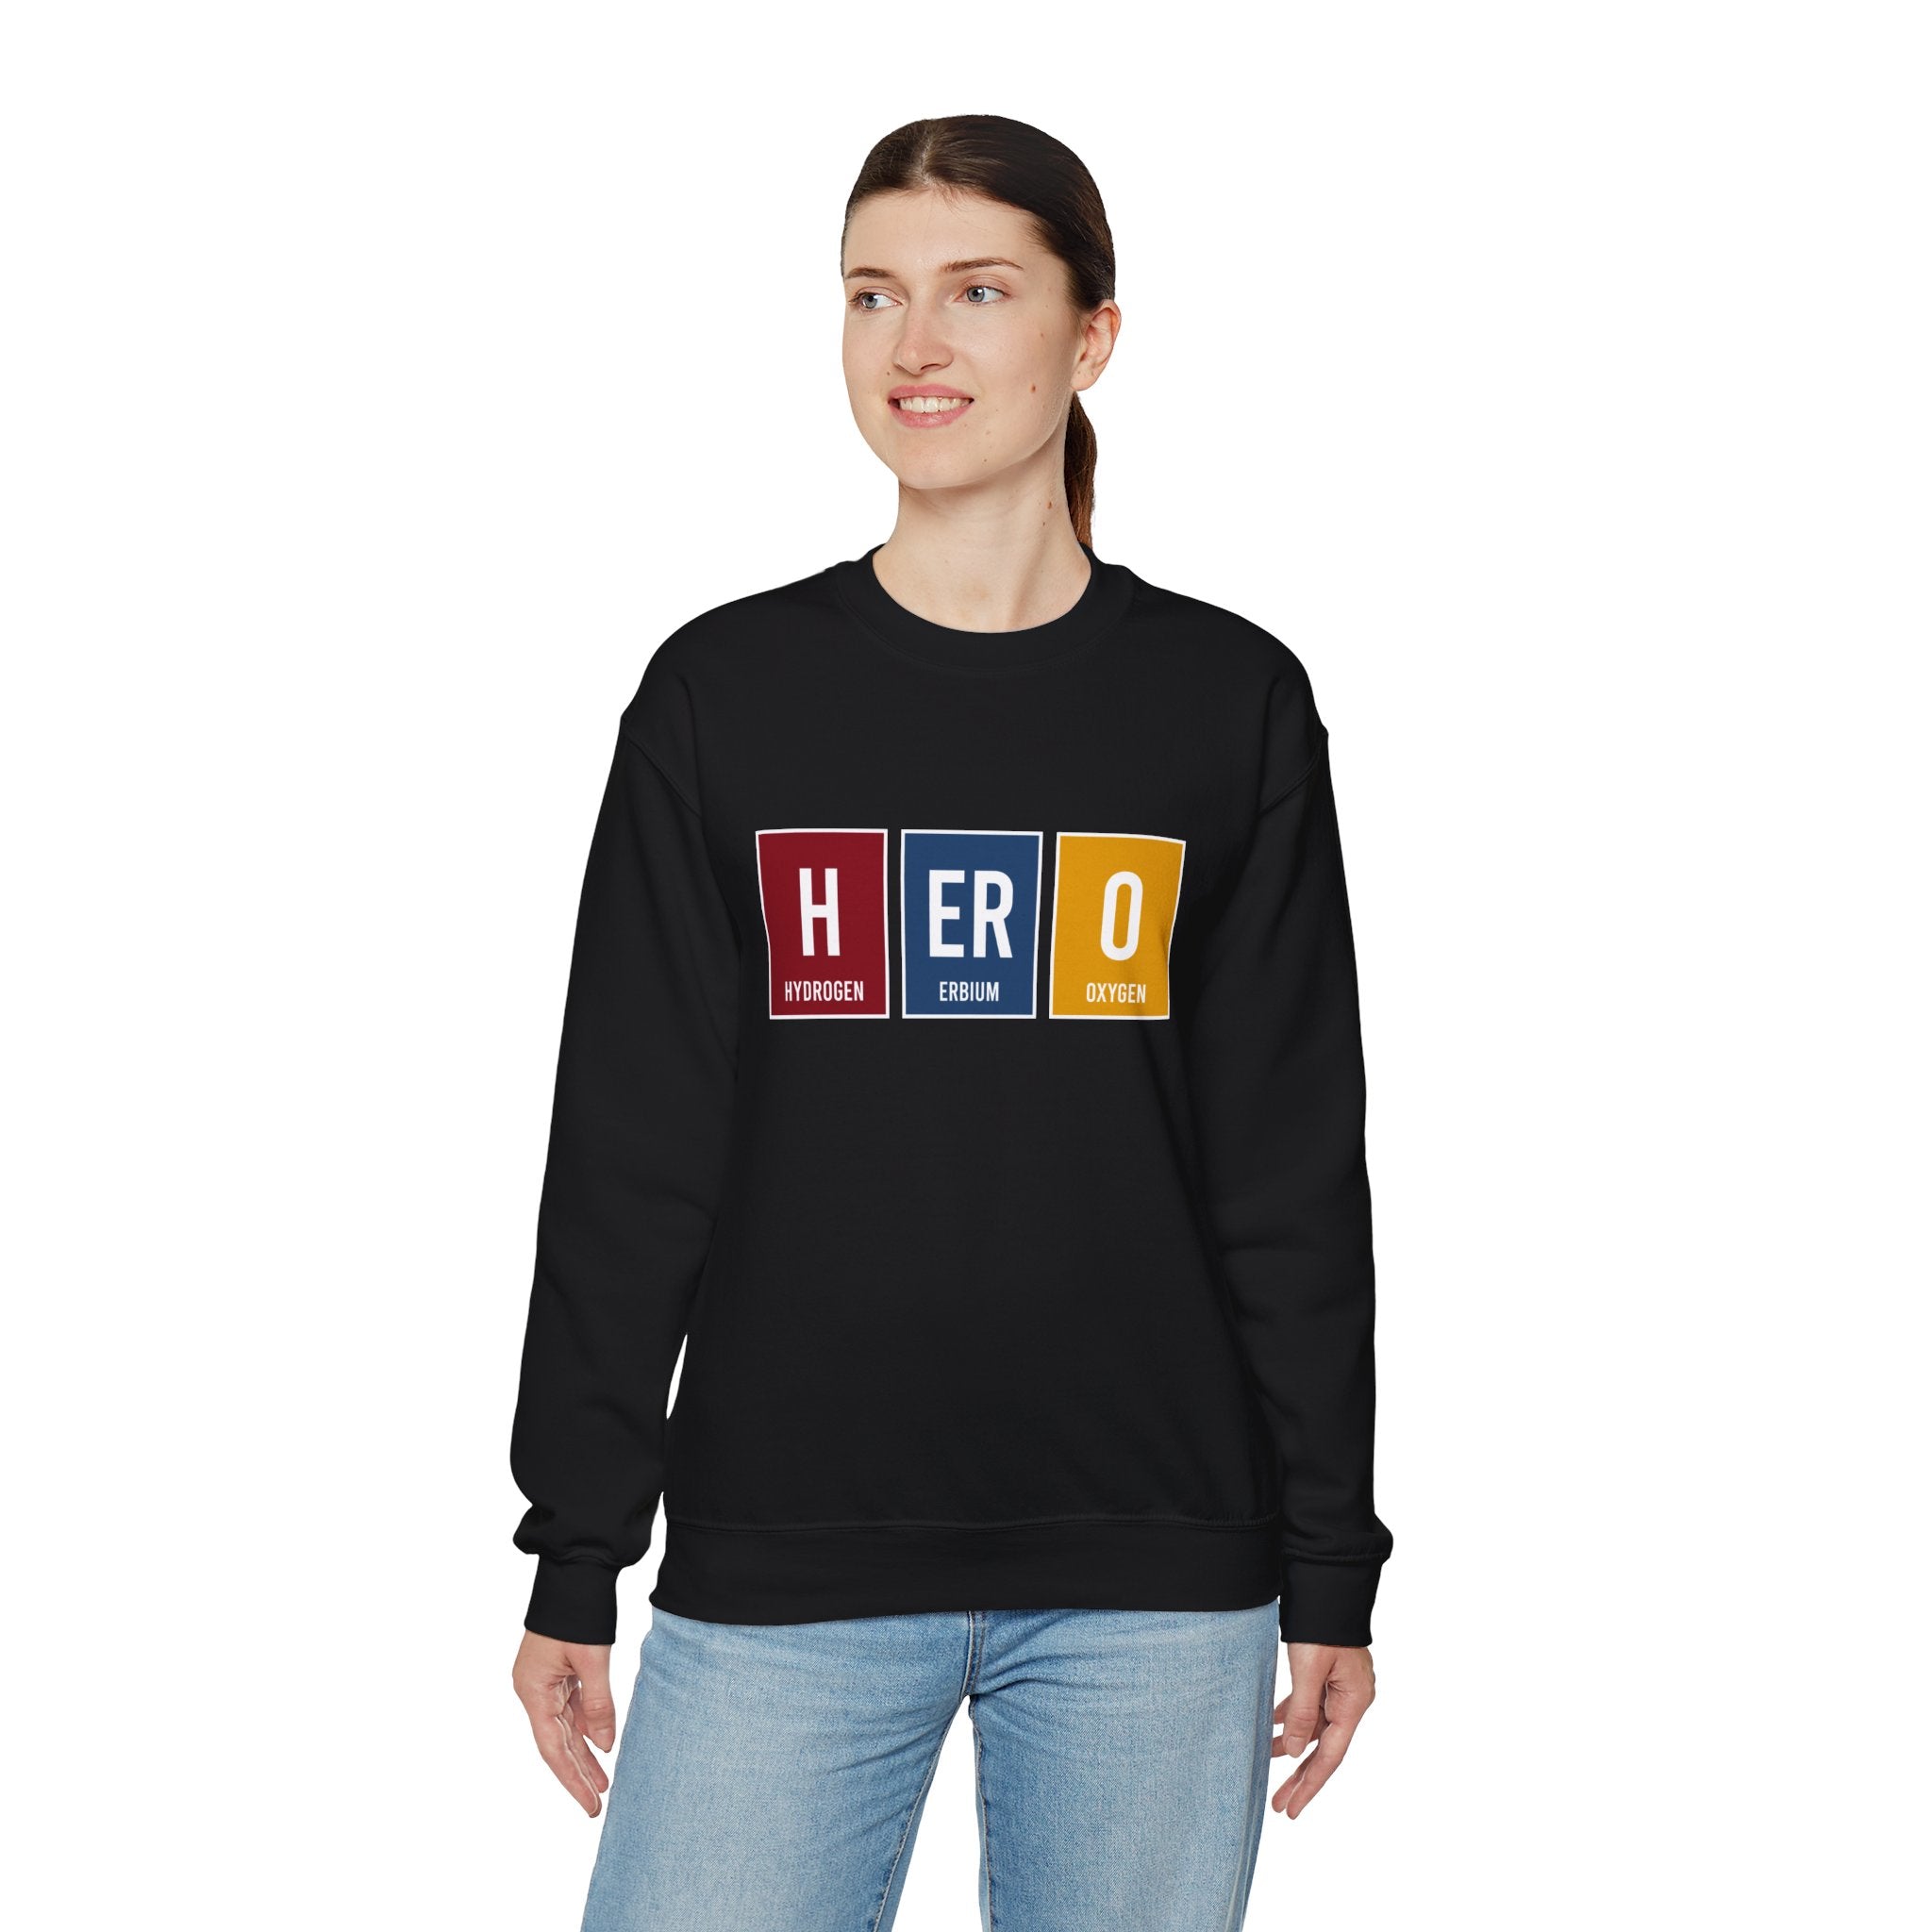 A person wearing a HERO - Sweatshirt, offering both comfort and style, with the word "HERO" spelled out using periodic table elements, stands against a plain white background. Perfect for staying warm during winter.